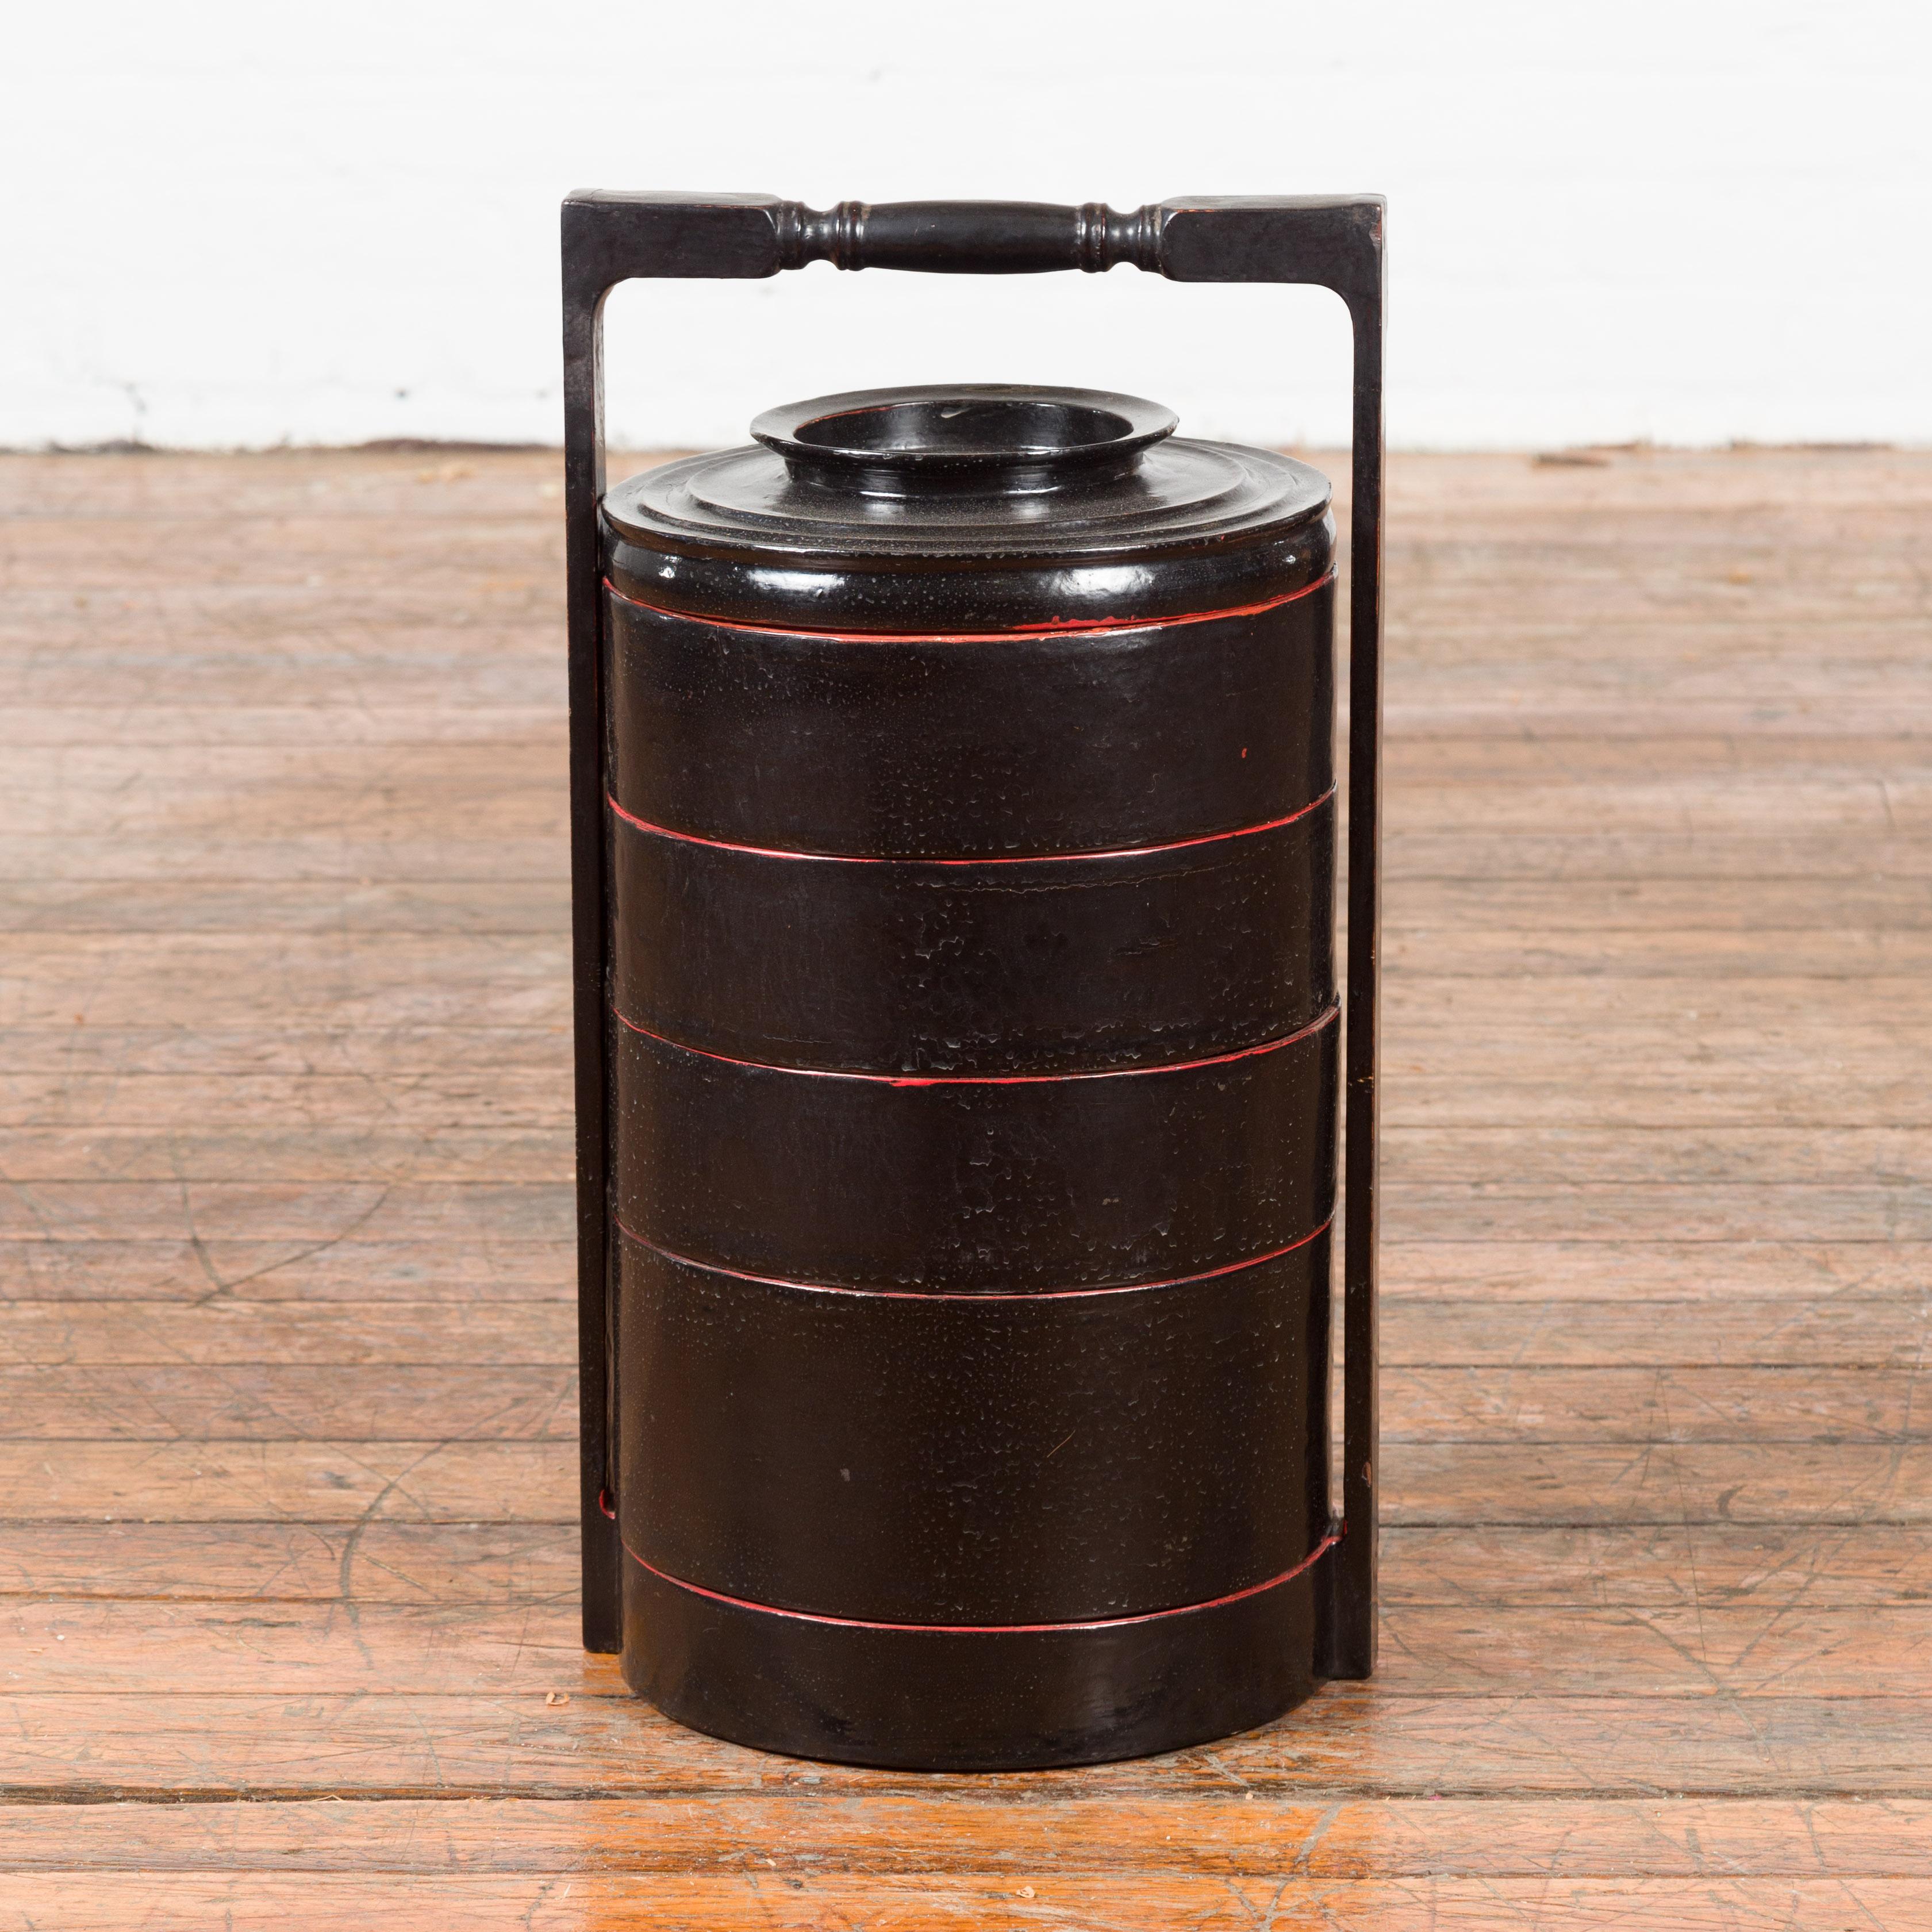 A Burmese vintage picnic basket from the mid 20th century, with black and red lacquer. Created in Burma during the midcentury period, this picnic basket features a circular black lacquered body made of five individual compartments stacked together